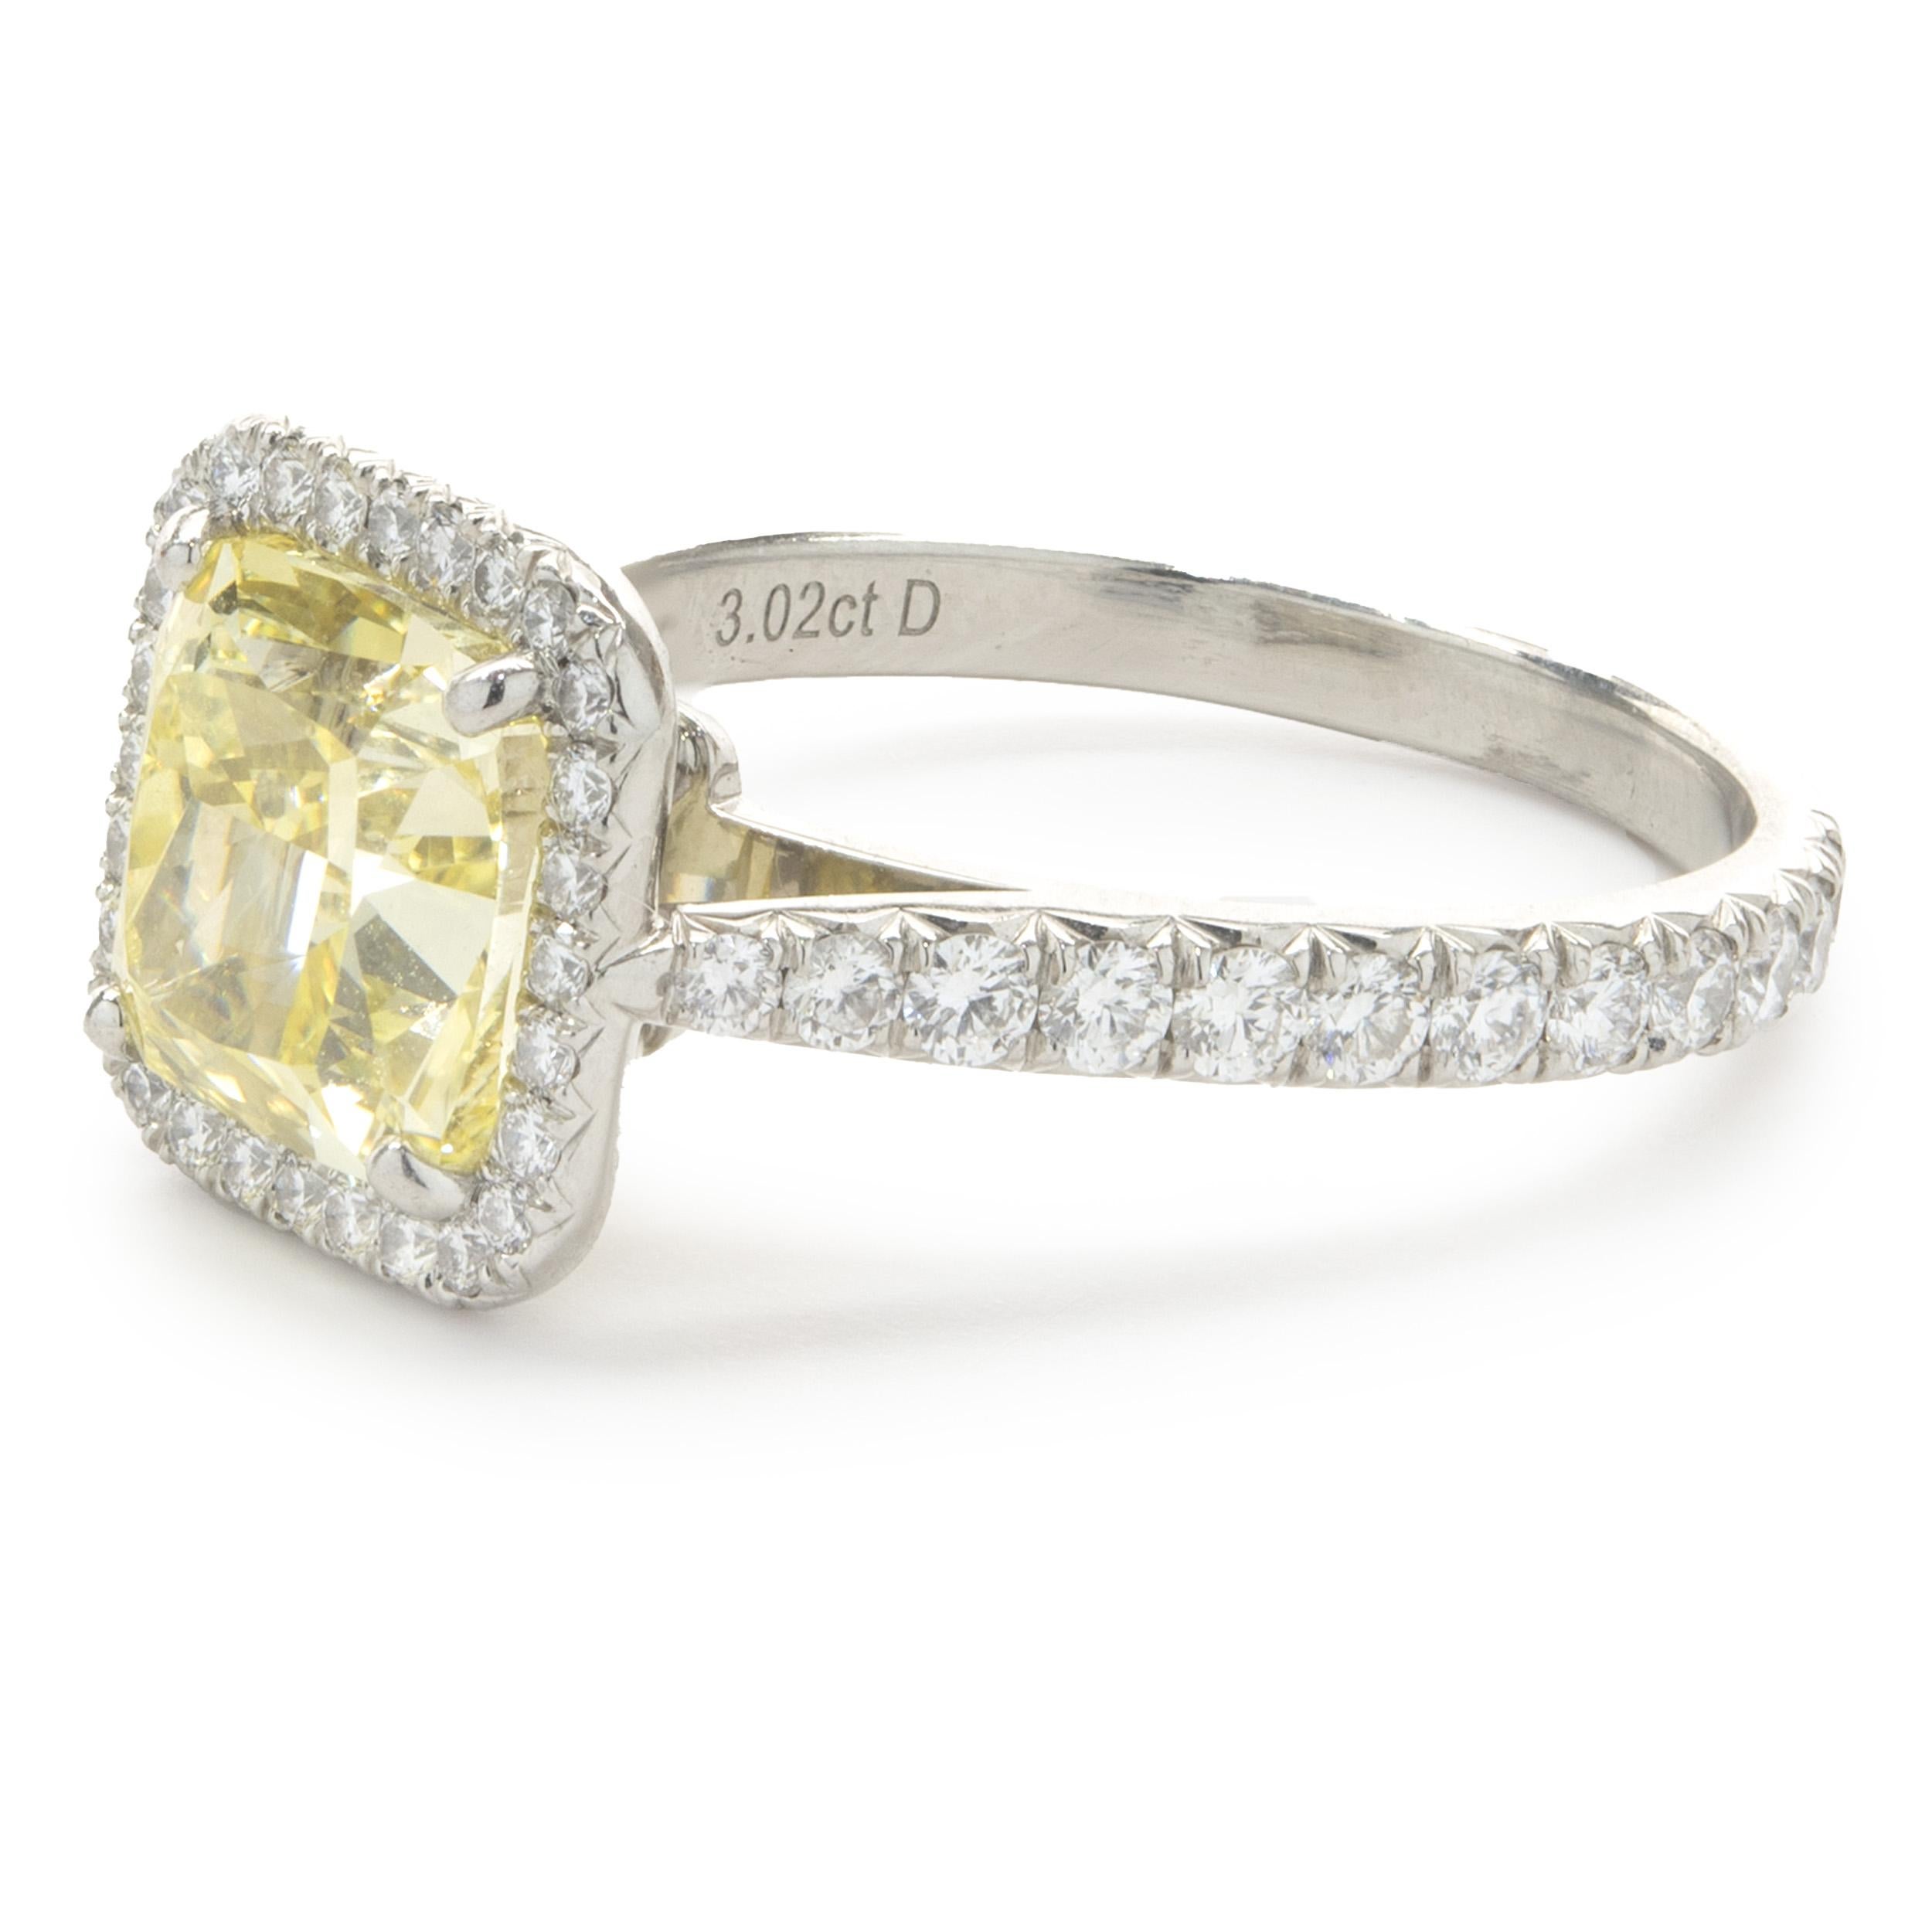 Designer: Cartier
Material: Platinum
Diamond: 1 cushion cut = 3.02ct
Color: Intense Fancy Yellow
Clarity: VS1
GIA: 2175140072
Diamond: round brilliant cut = 0.97cttw
Color: F
Clarity: VS1
Serial # 79PXXX
Size: 6.5 (complimentary sizing